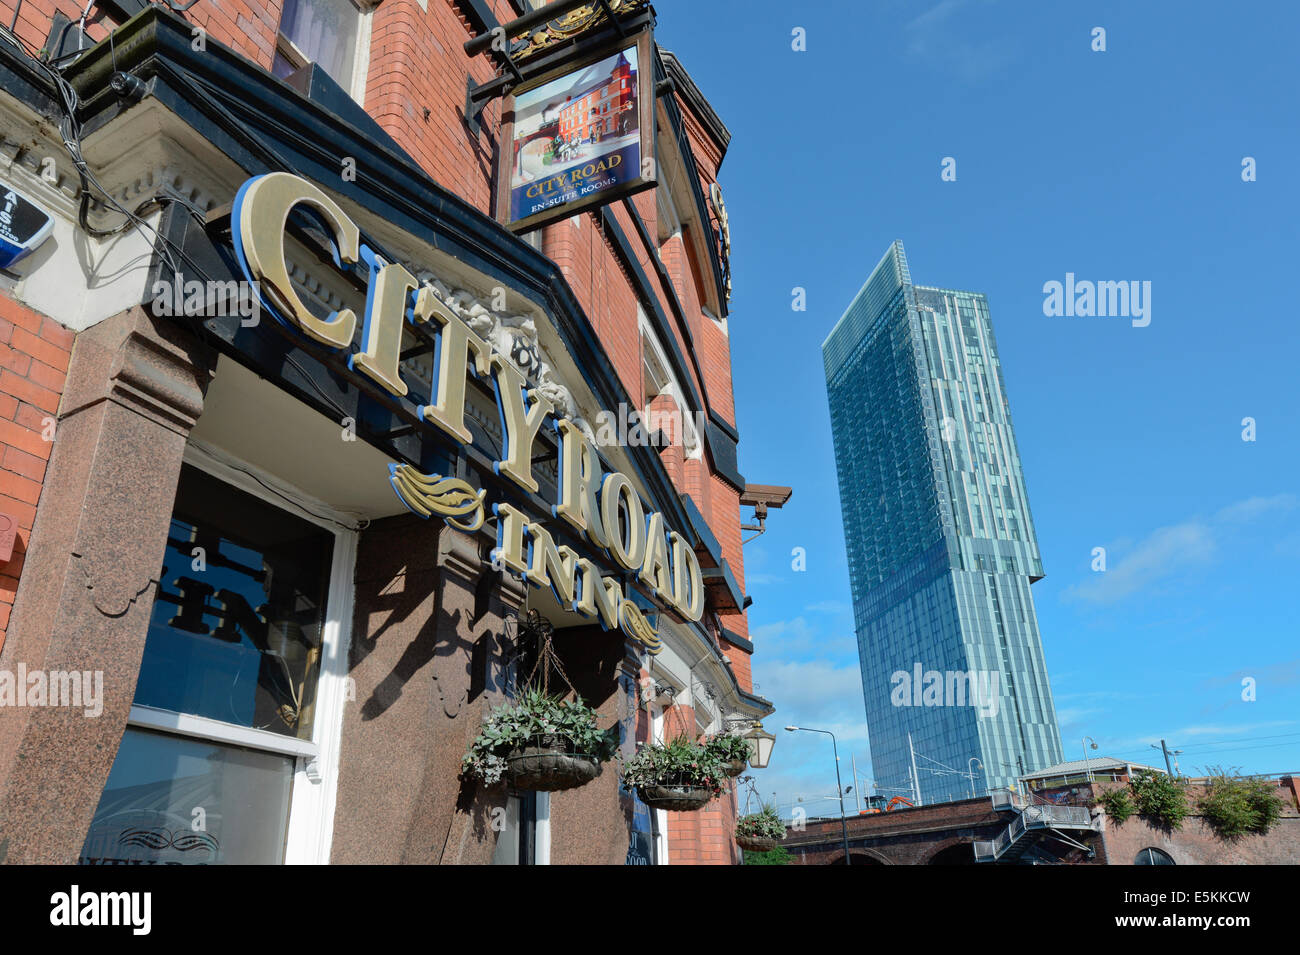 The signage for the City Road Inn traditional English city pub, located on Albion Street, Manchester, UK. Stock Photo